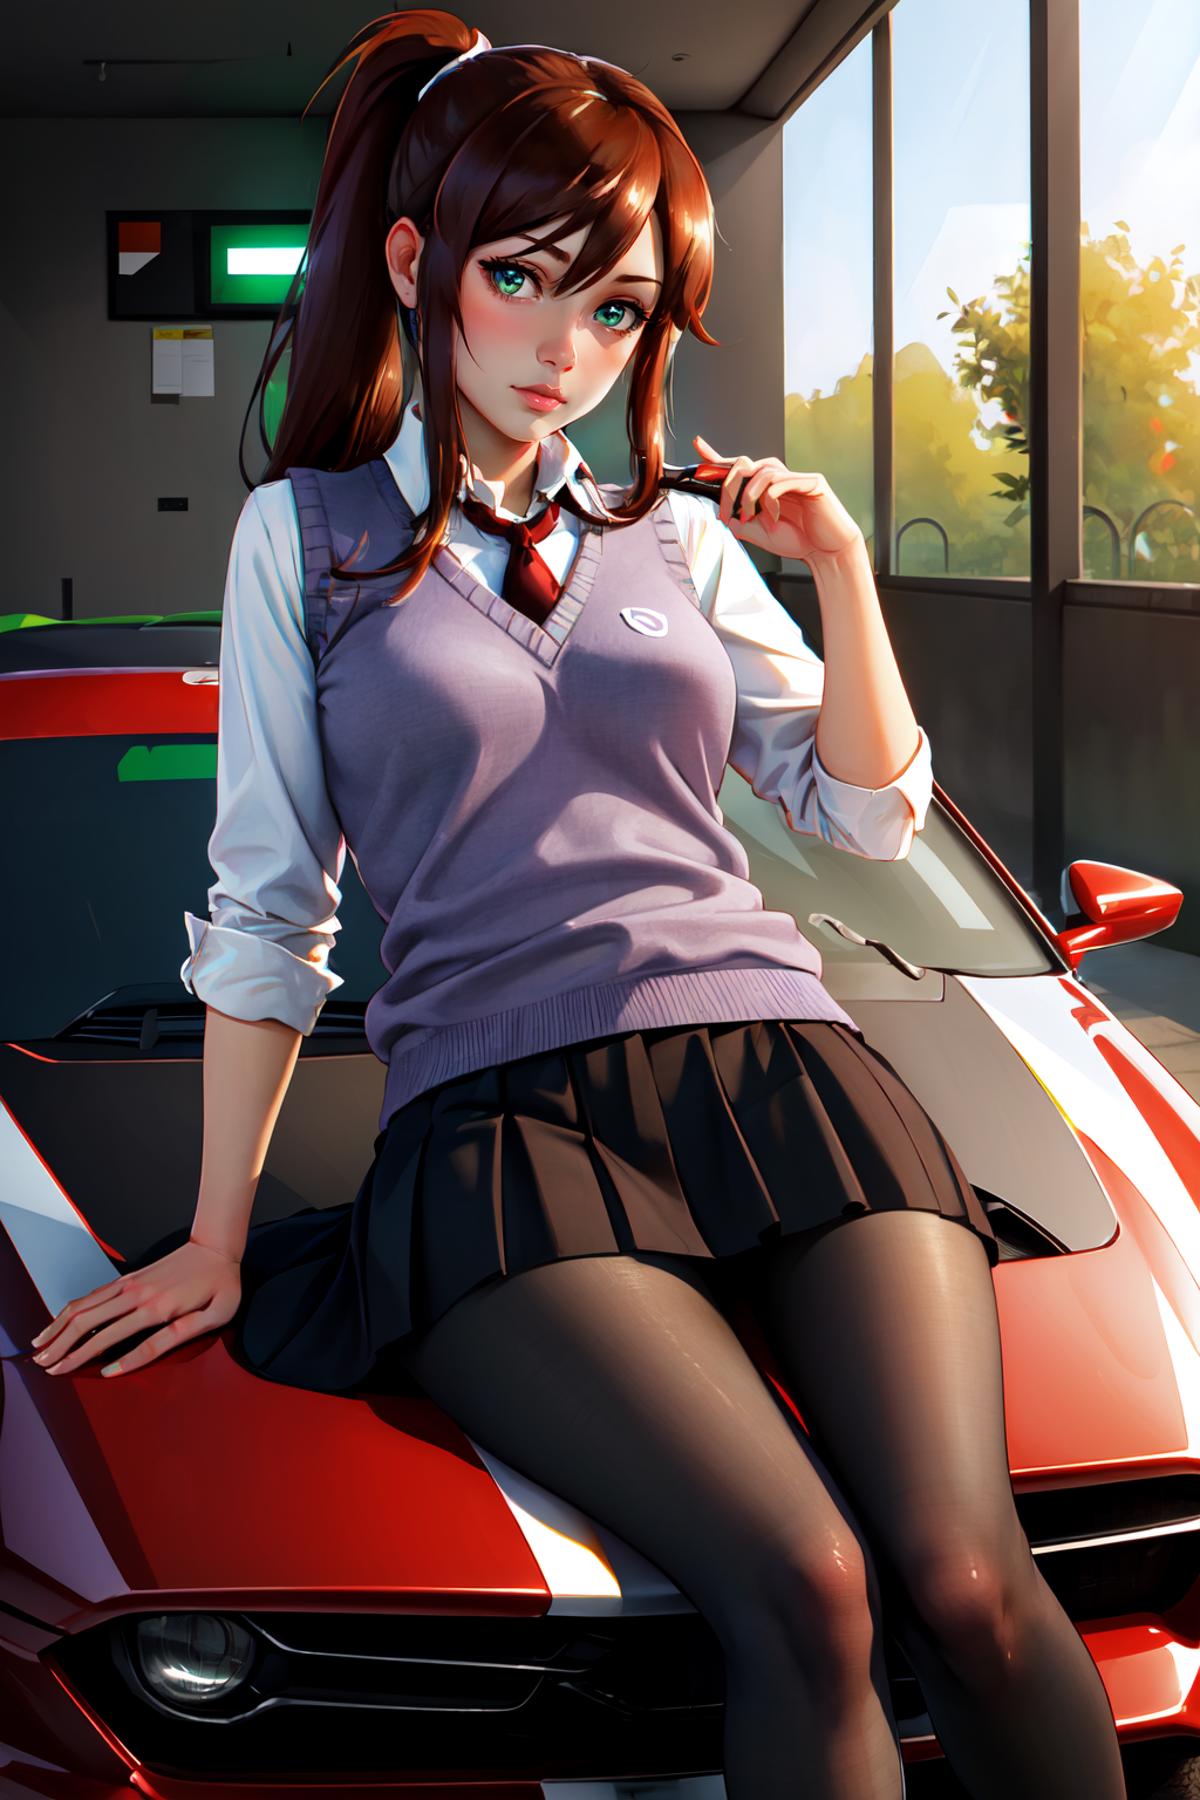 Sports Cars with Girl on Hood! - fC - (LORA) image by FallenIncursio